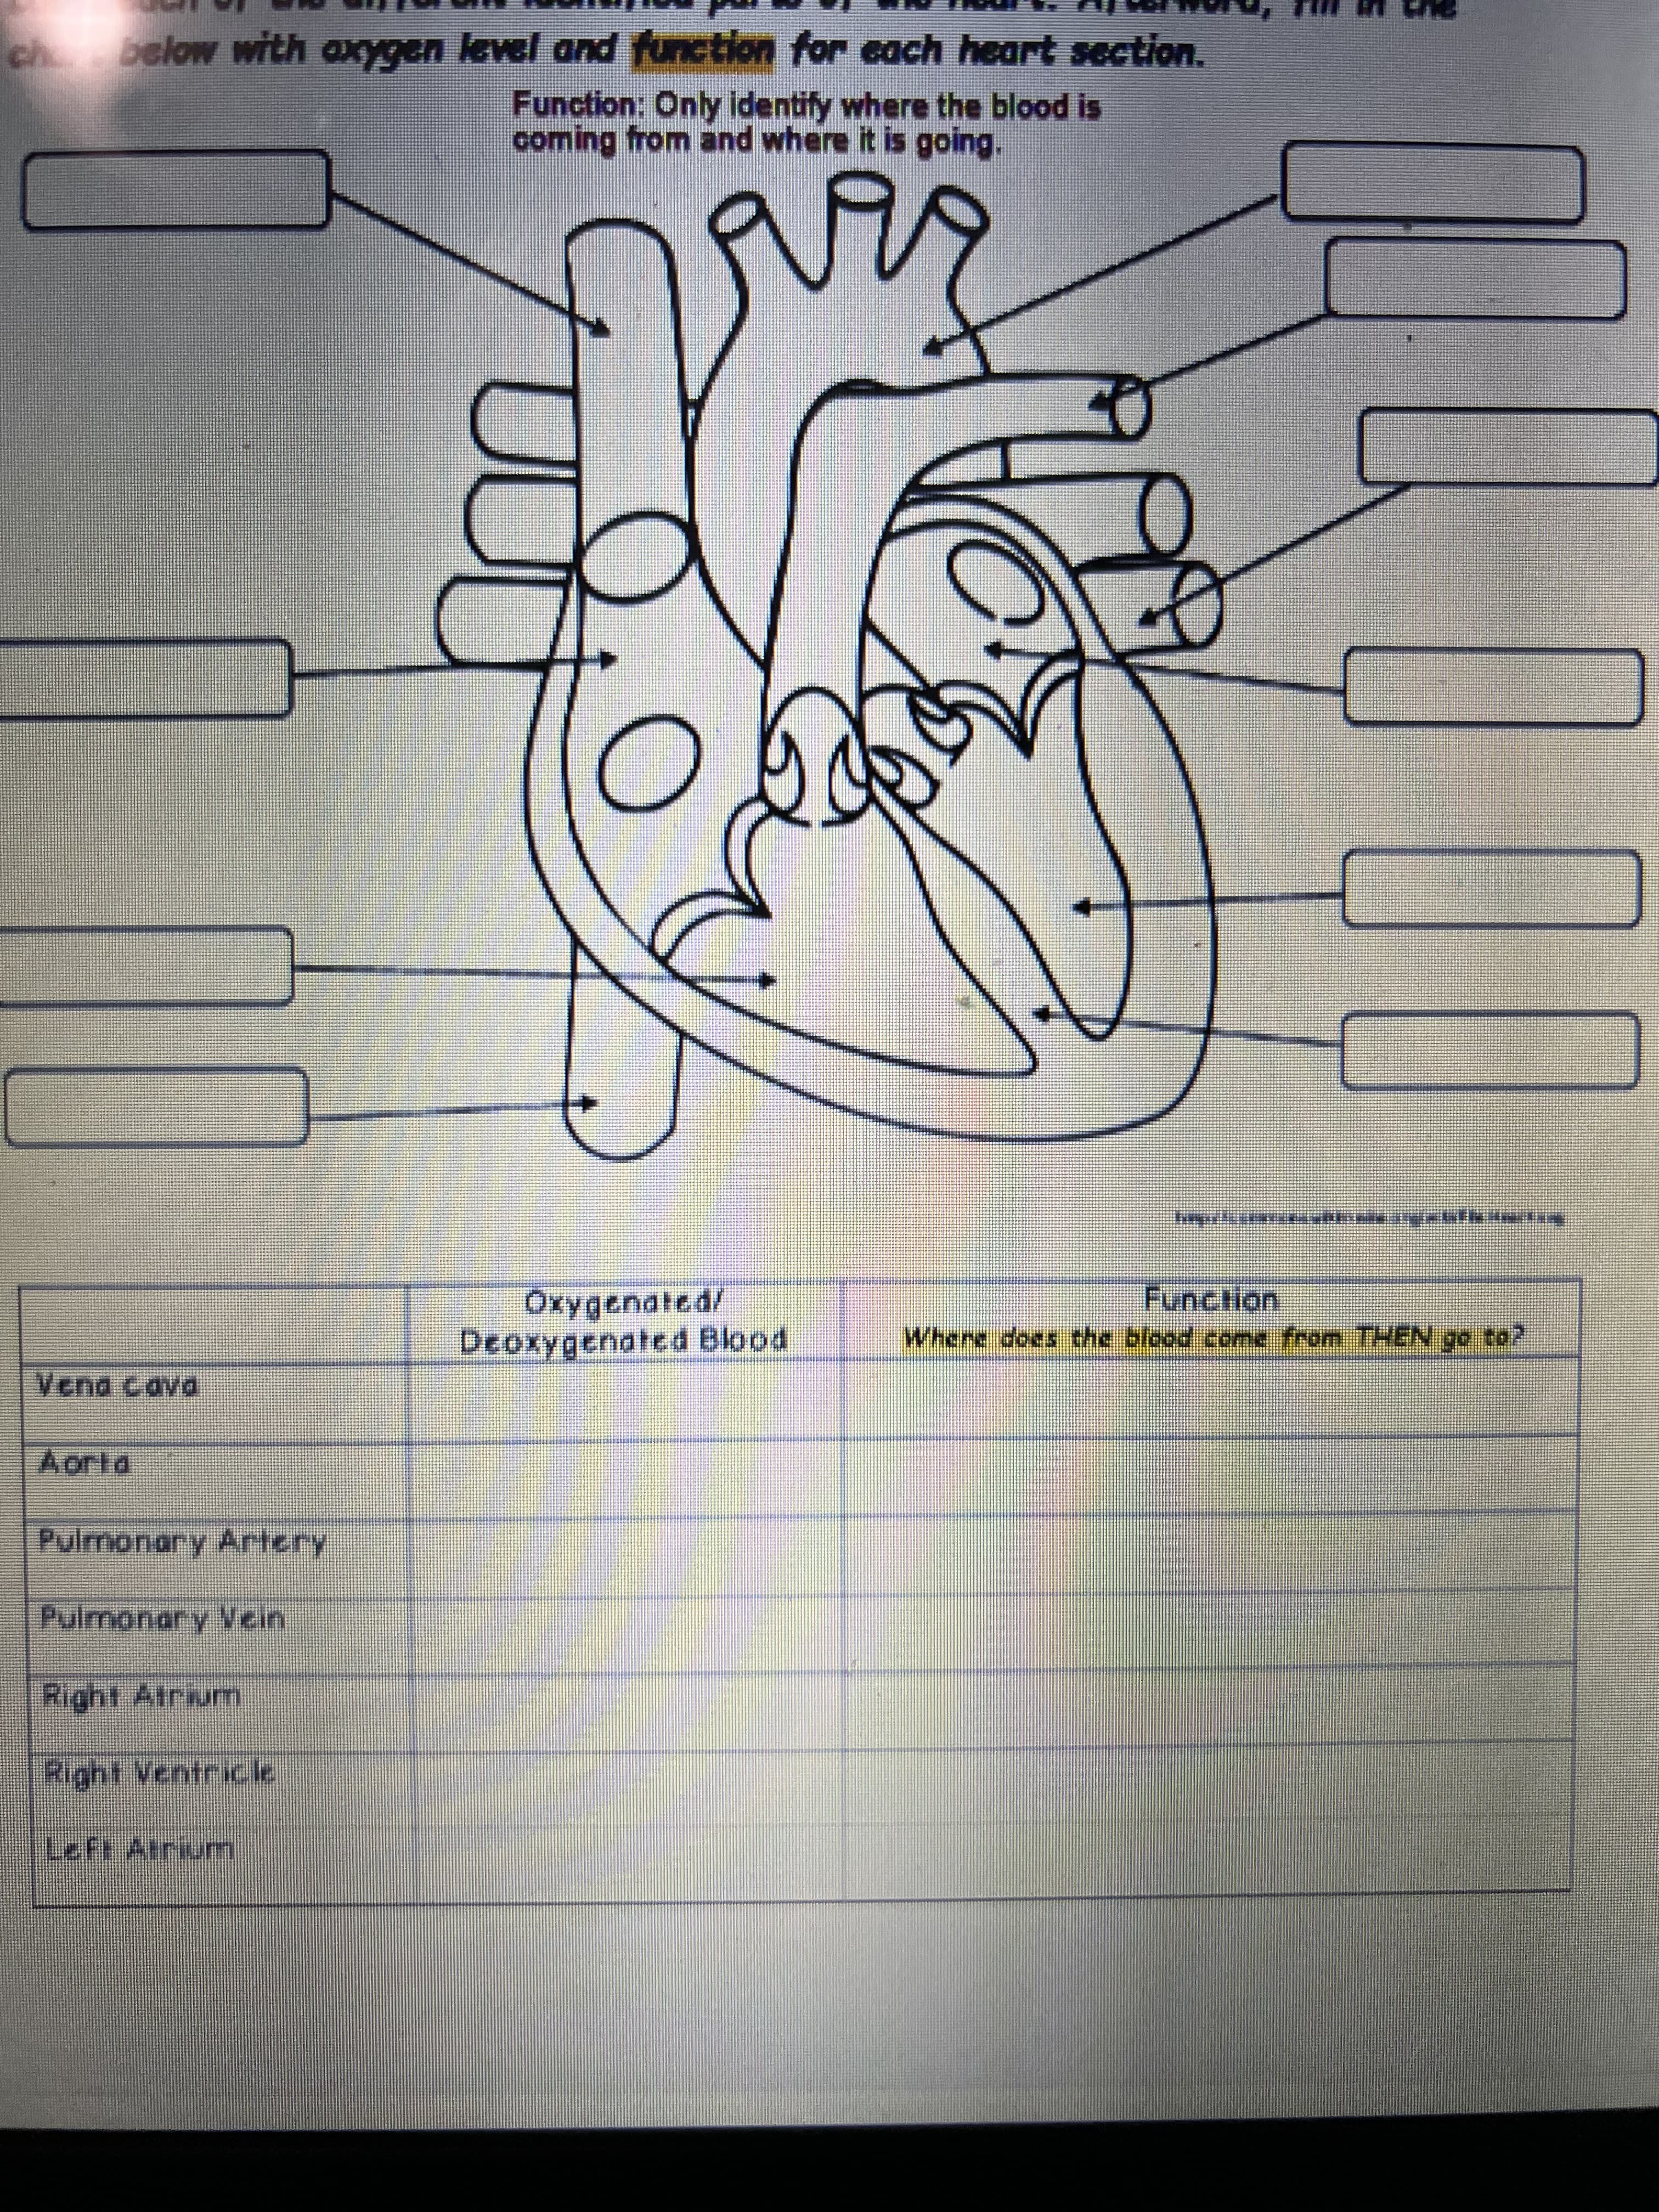 ch below with axygen level and function for each heart section.
Function: Only identify where the blood is
coming from and where it is going.
Oxygenated/
Deoxygenated Blood
Funclion
Where does che blood come from THEN go to2
Vena cava
Aorta
Pulmonary Artery
Pulmonary Vcin
Right Atrium
Right Ventrice
Left Arrium
